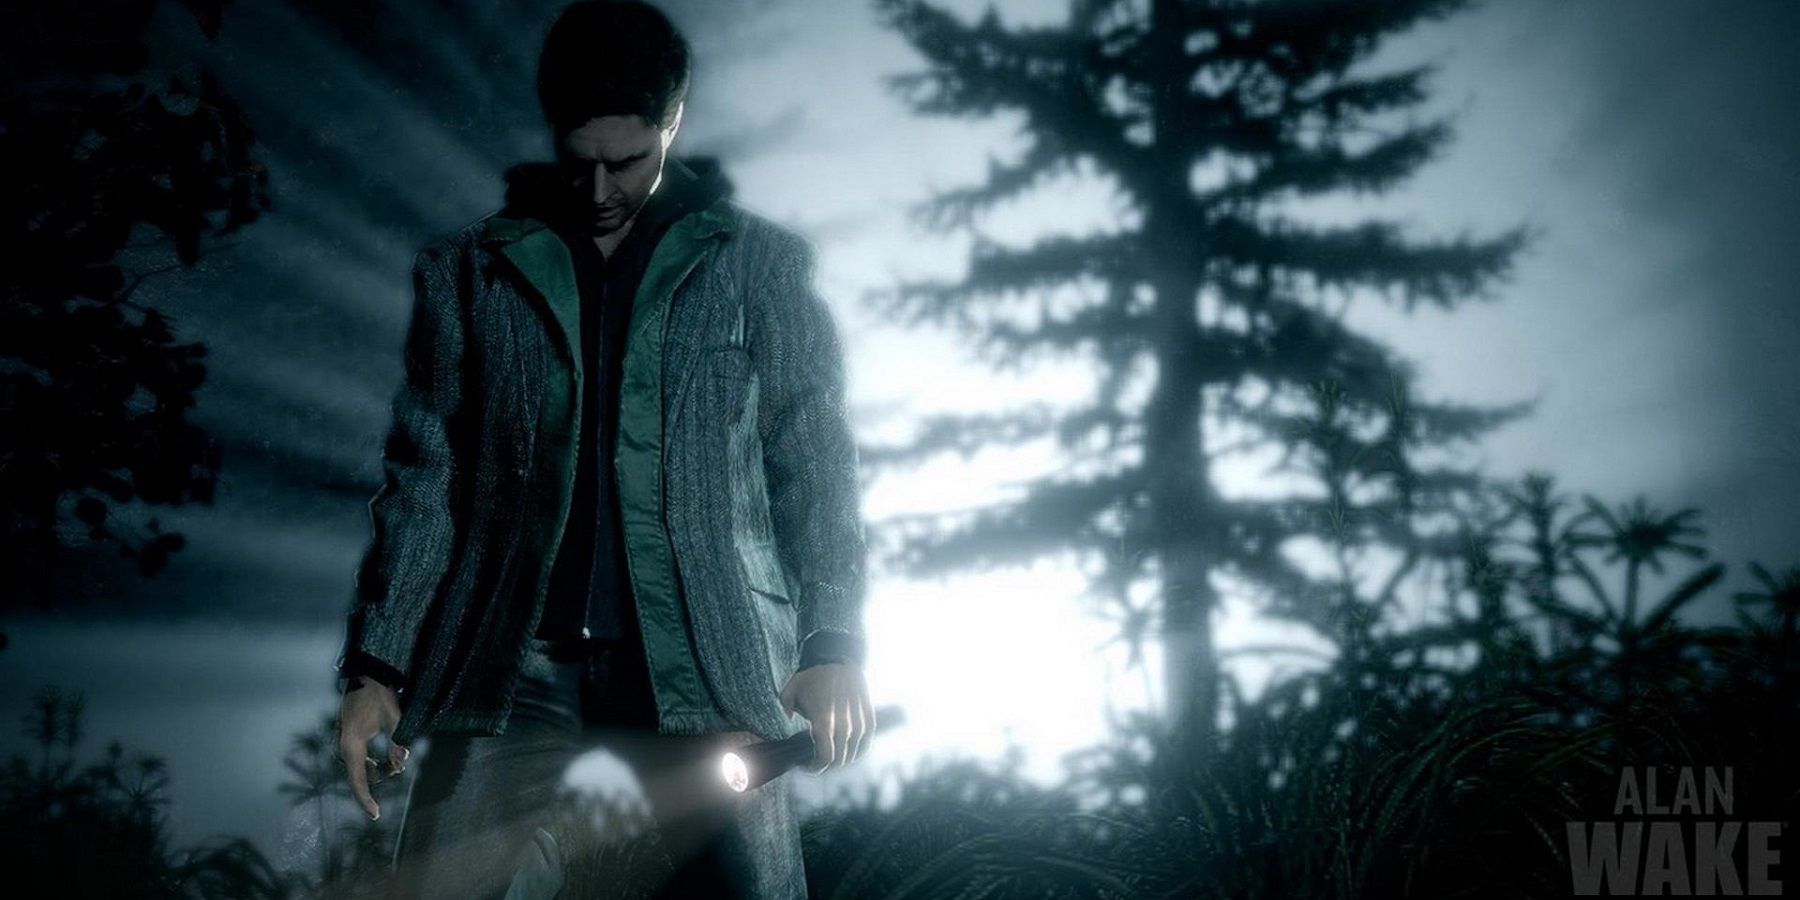 Image from Alan Wake showing the titular character in the foreground as a light shines behind him.